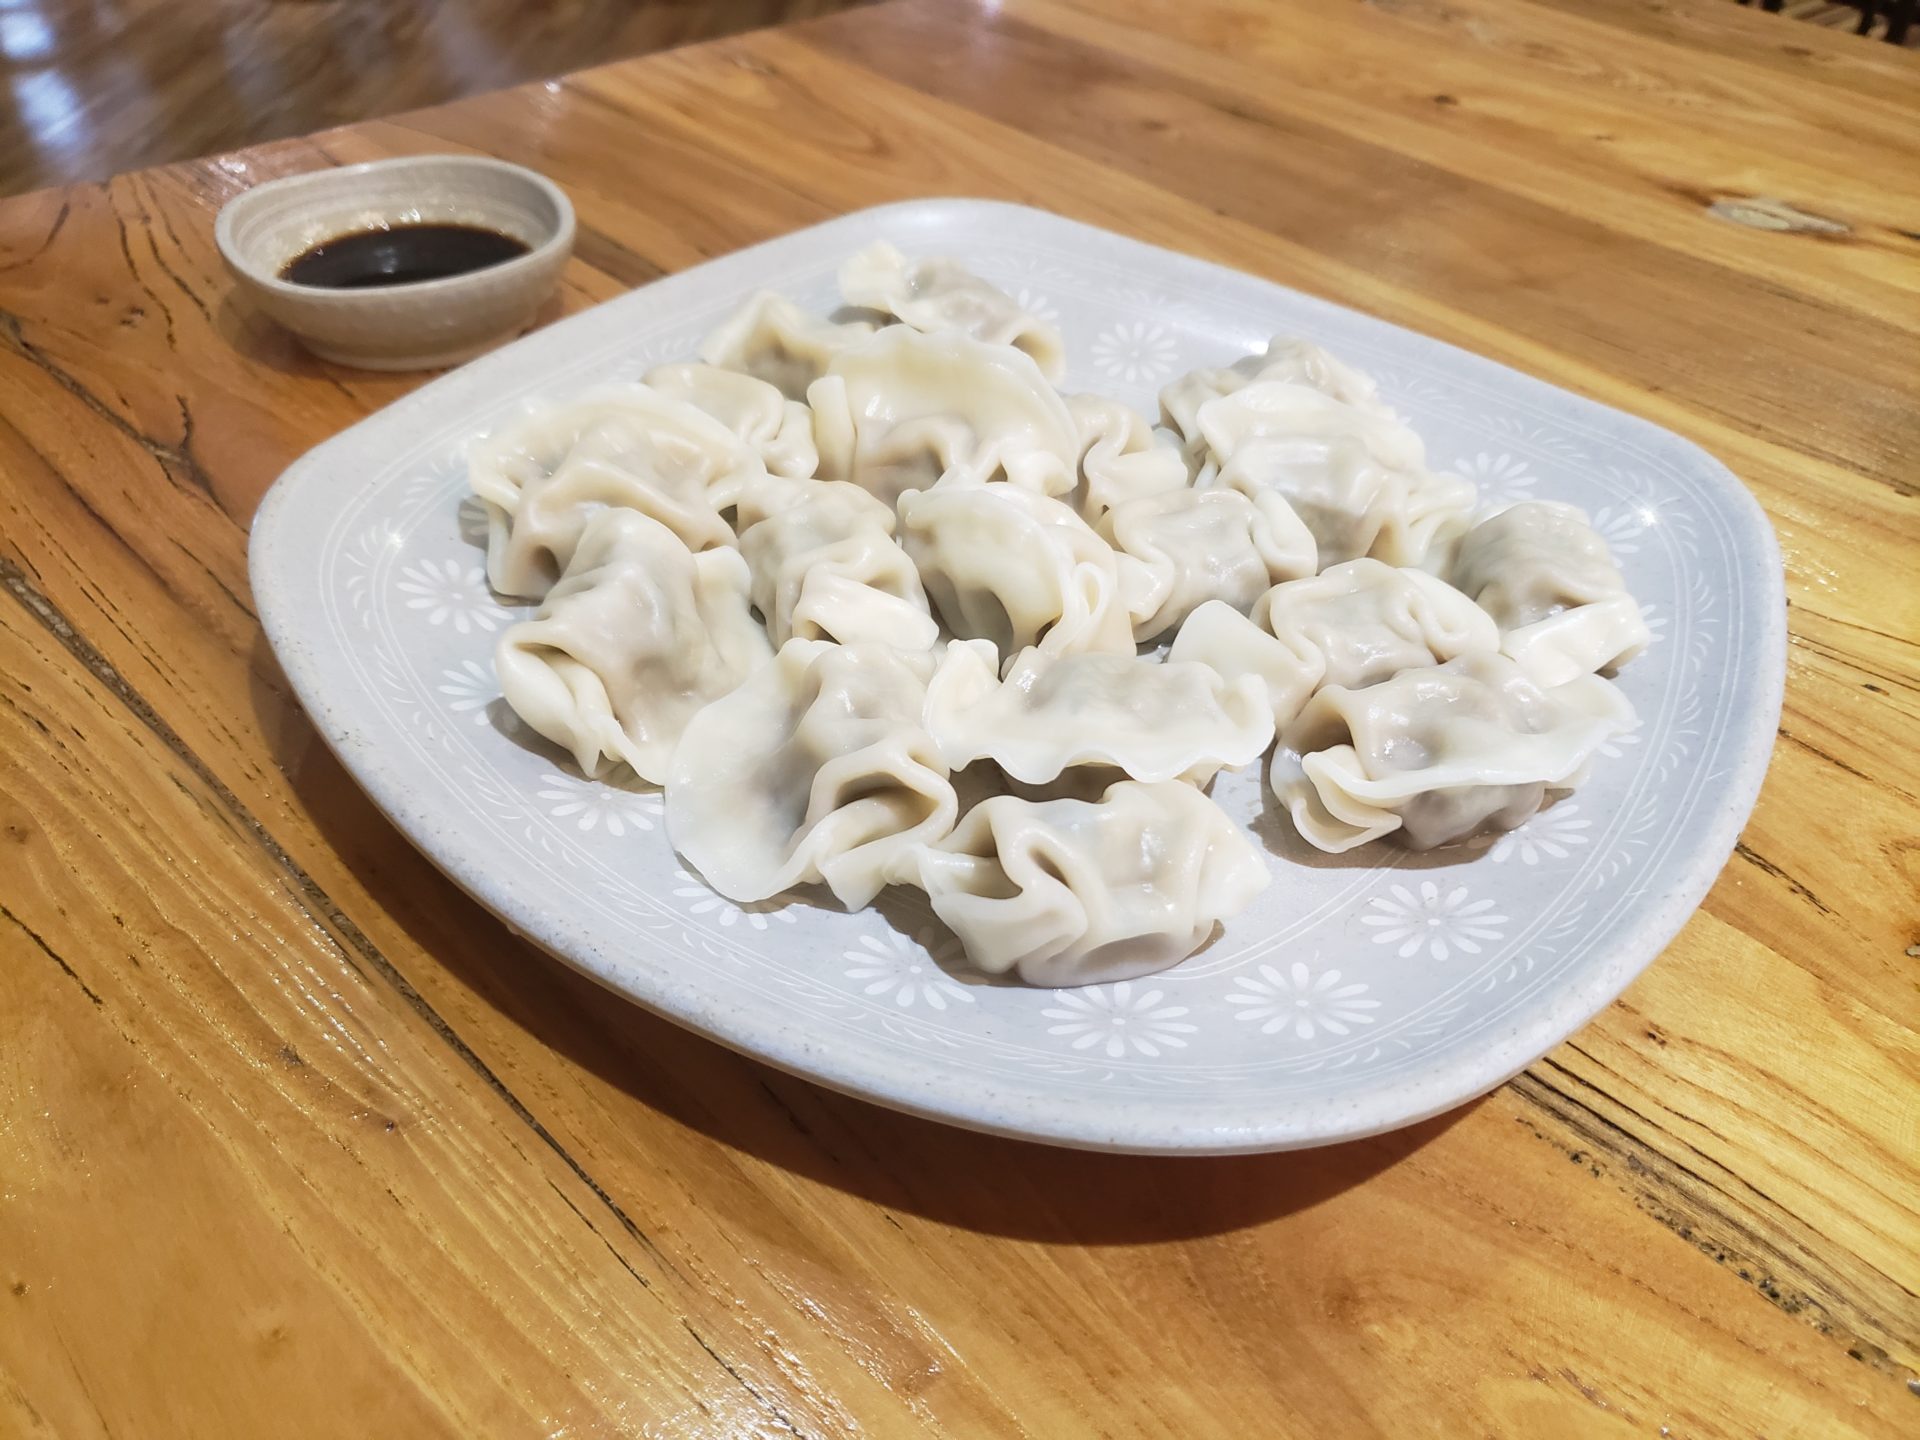 a plate of dumplings on a wooden table